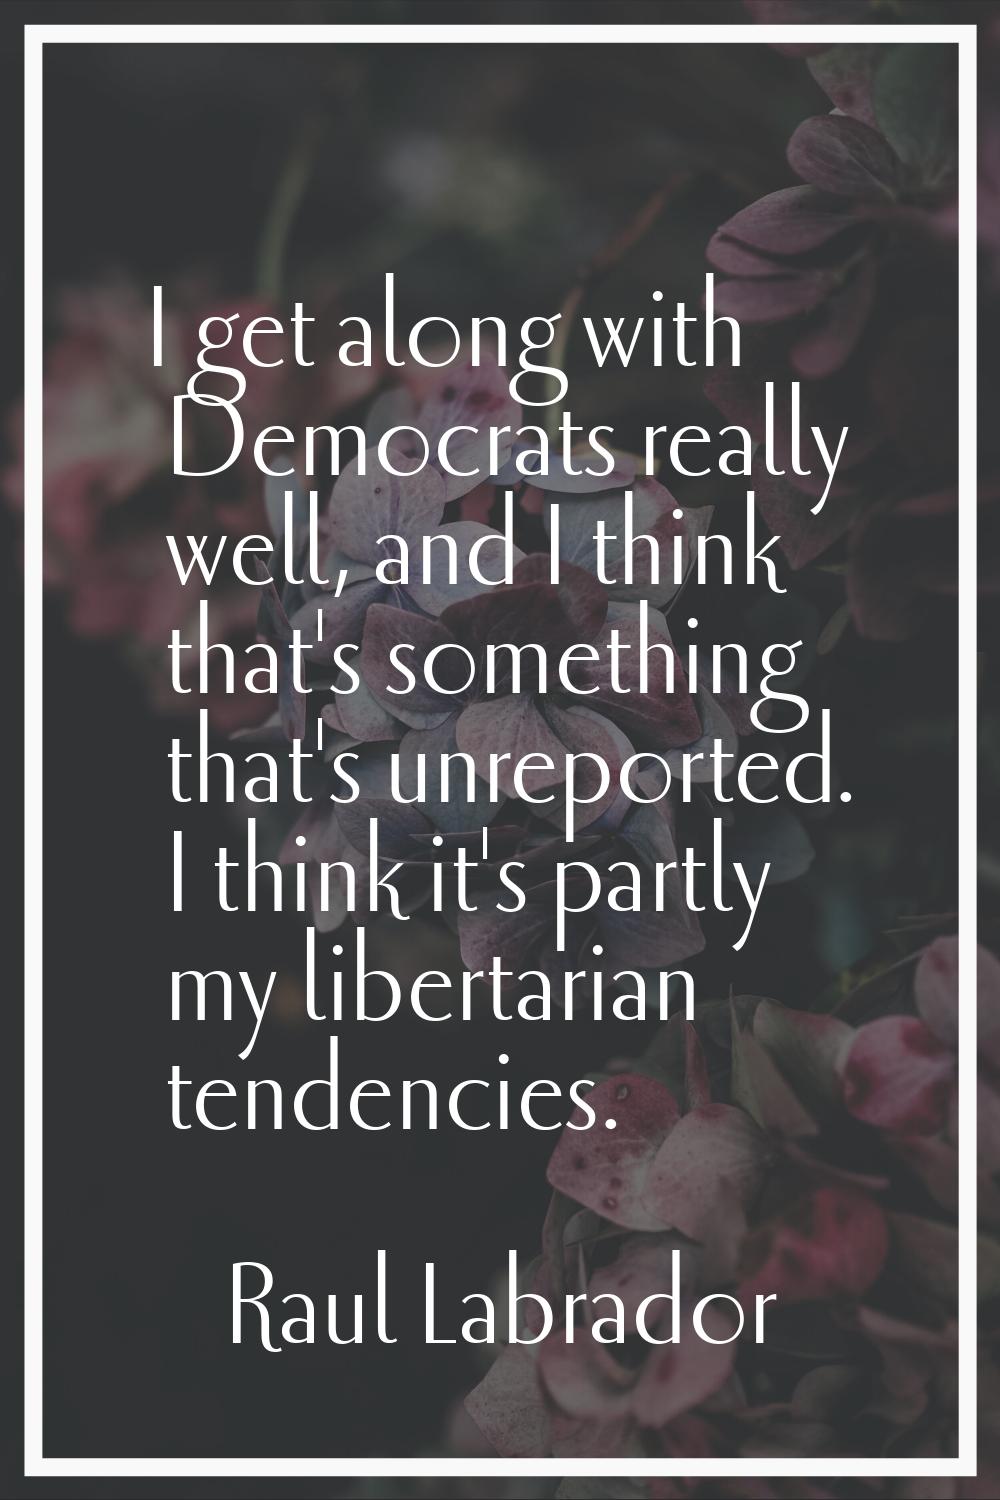 I get along with Democrats really well, and I think that's something that's unreported. I think it'